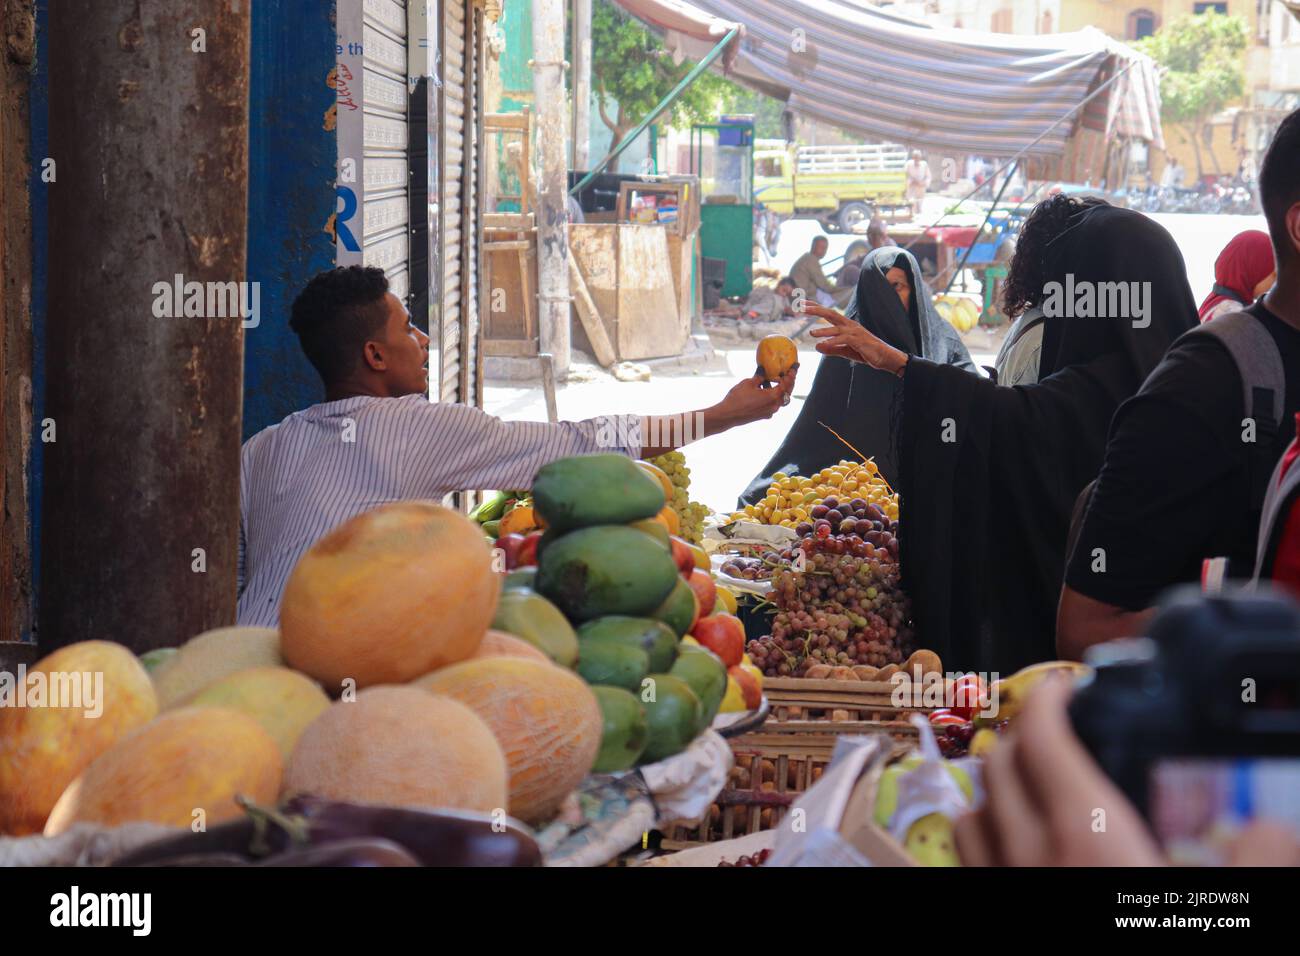 ESNA, LUXOR, EGYPT - AUGUST 13, 2022: Veiled women wearing traditional black clothes buying fruits at local market in the city of Esna, south of Luxor. Stock Photo